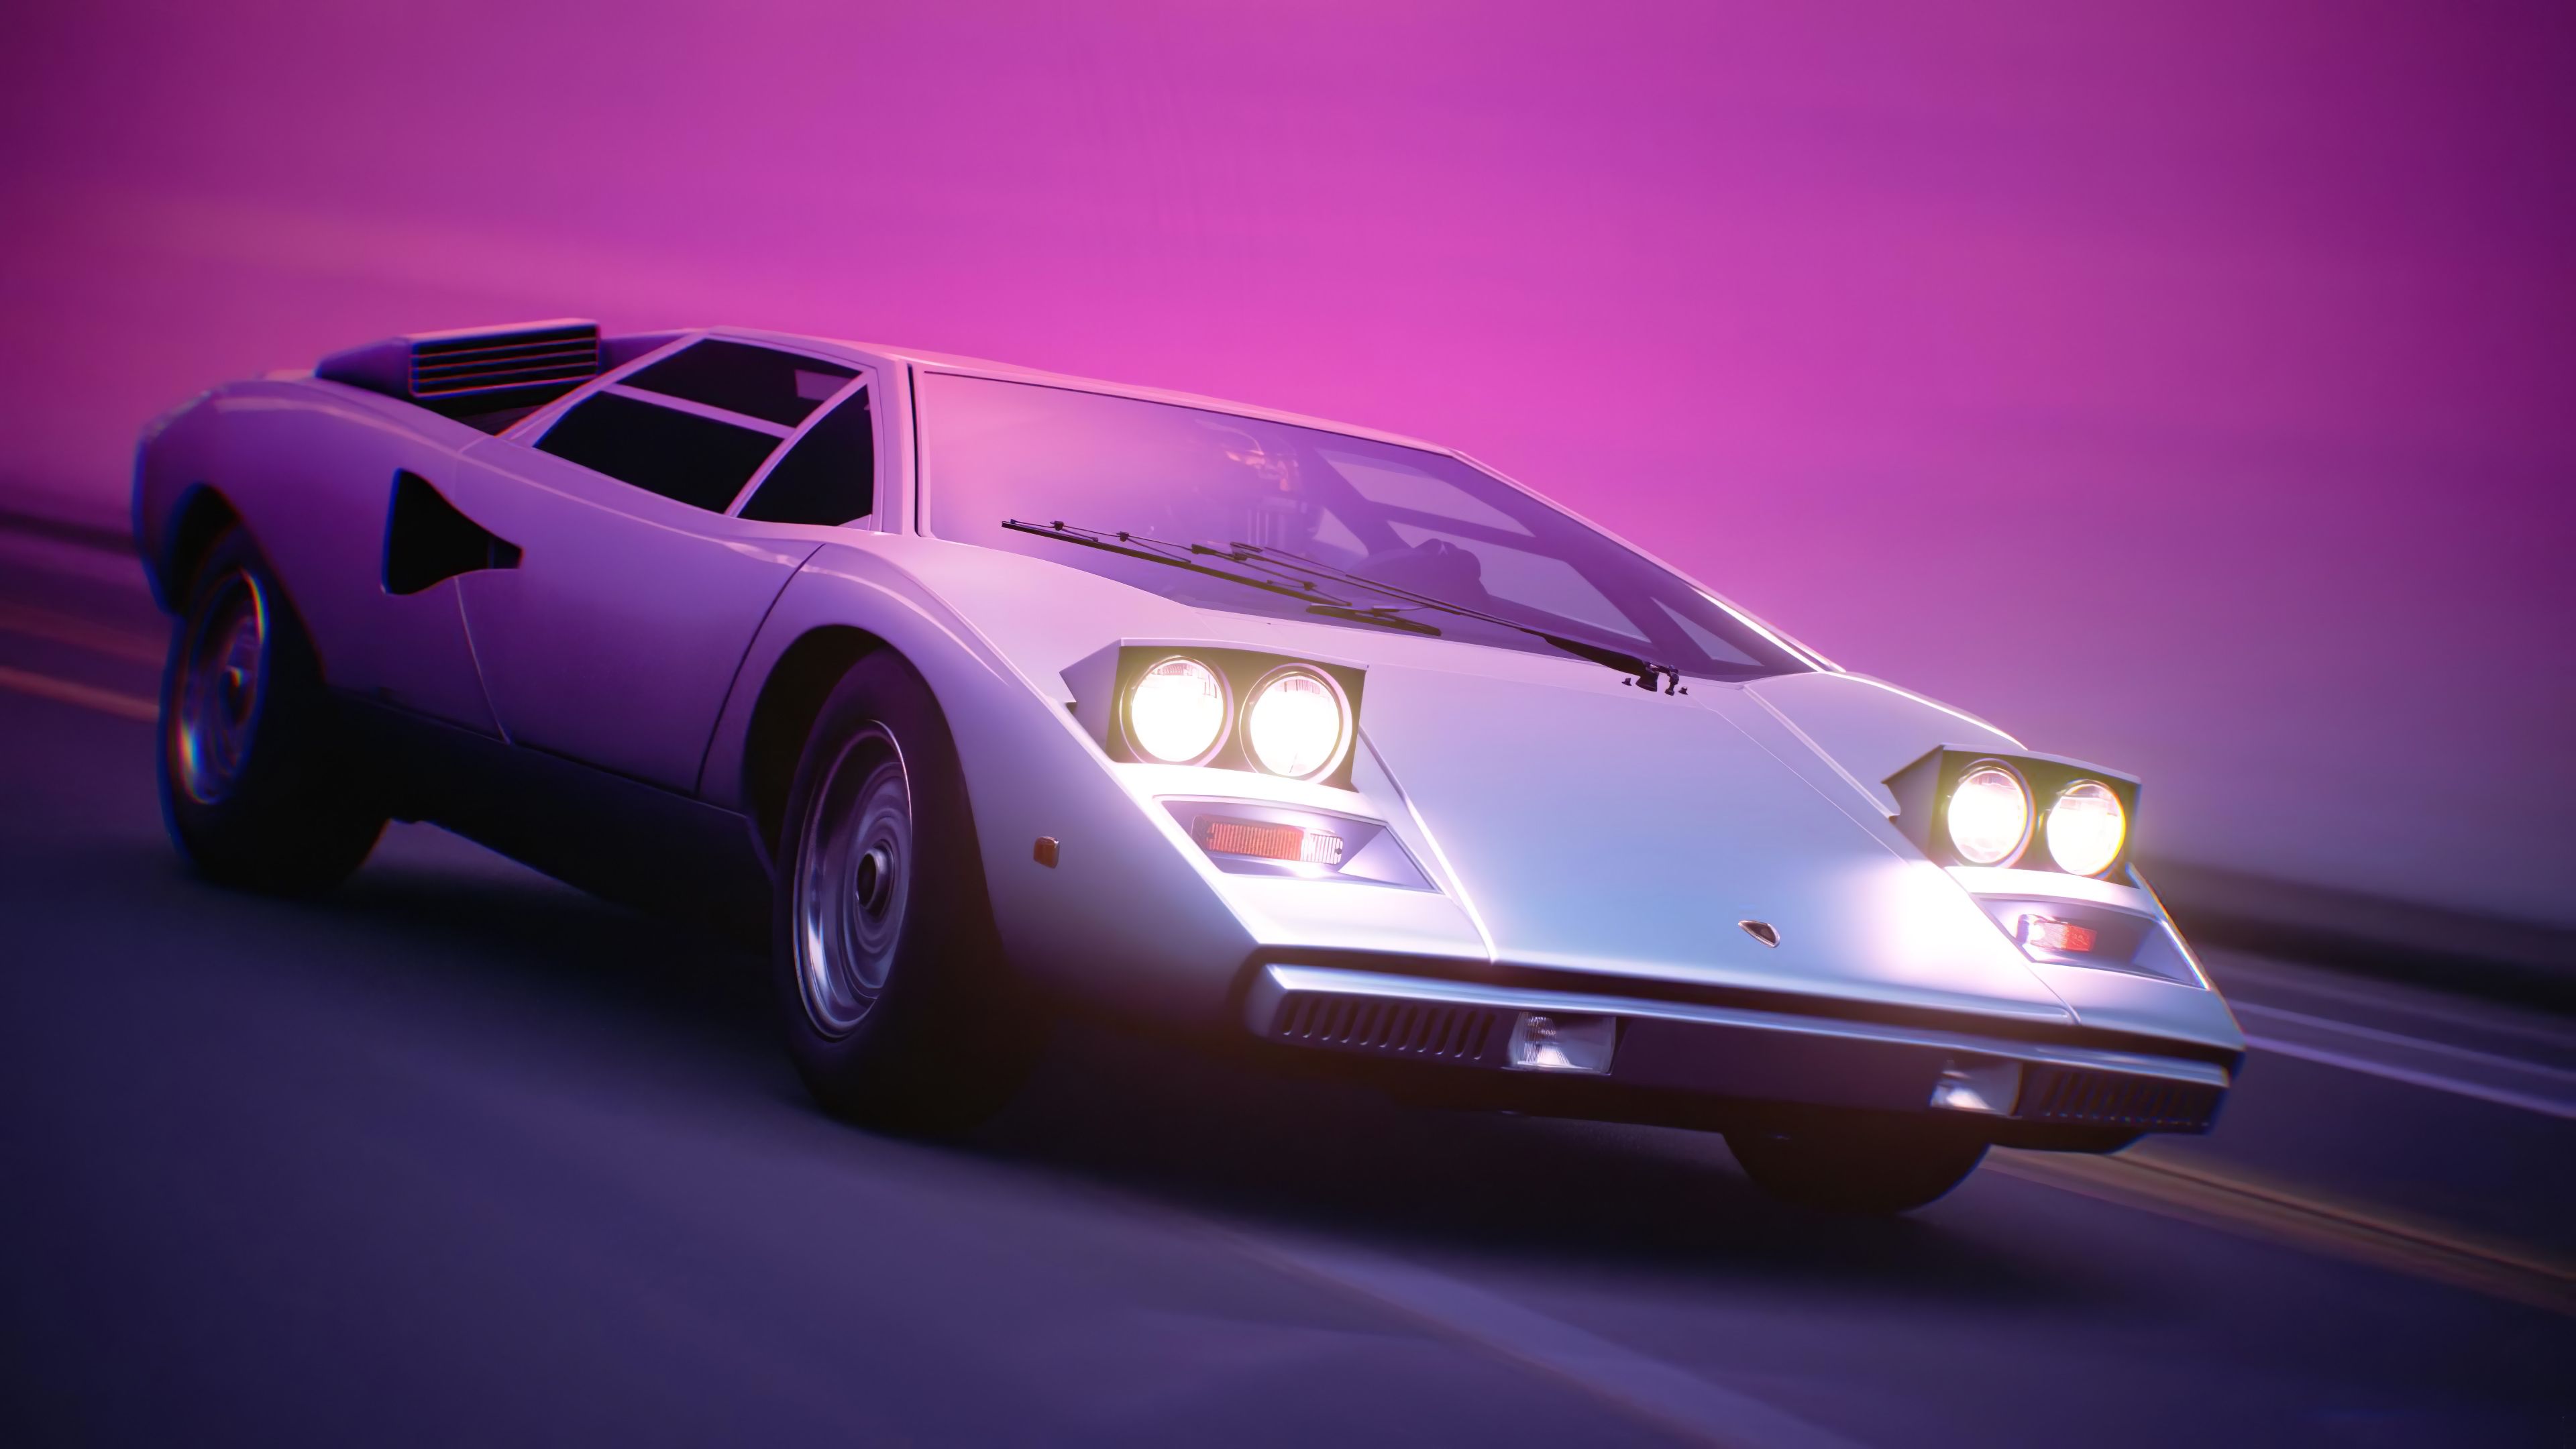 Outrun Car 4k, HD Cars, 4k Wallpaper, Image, Background, Photo and Picture